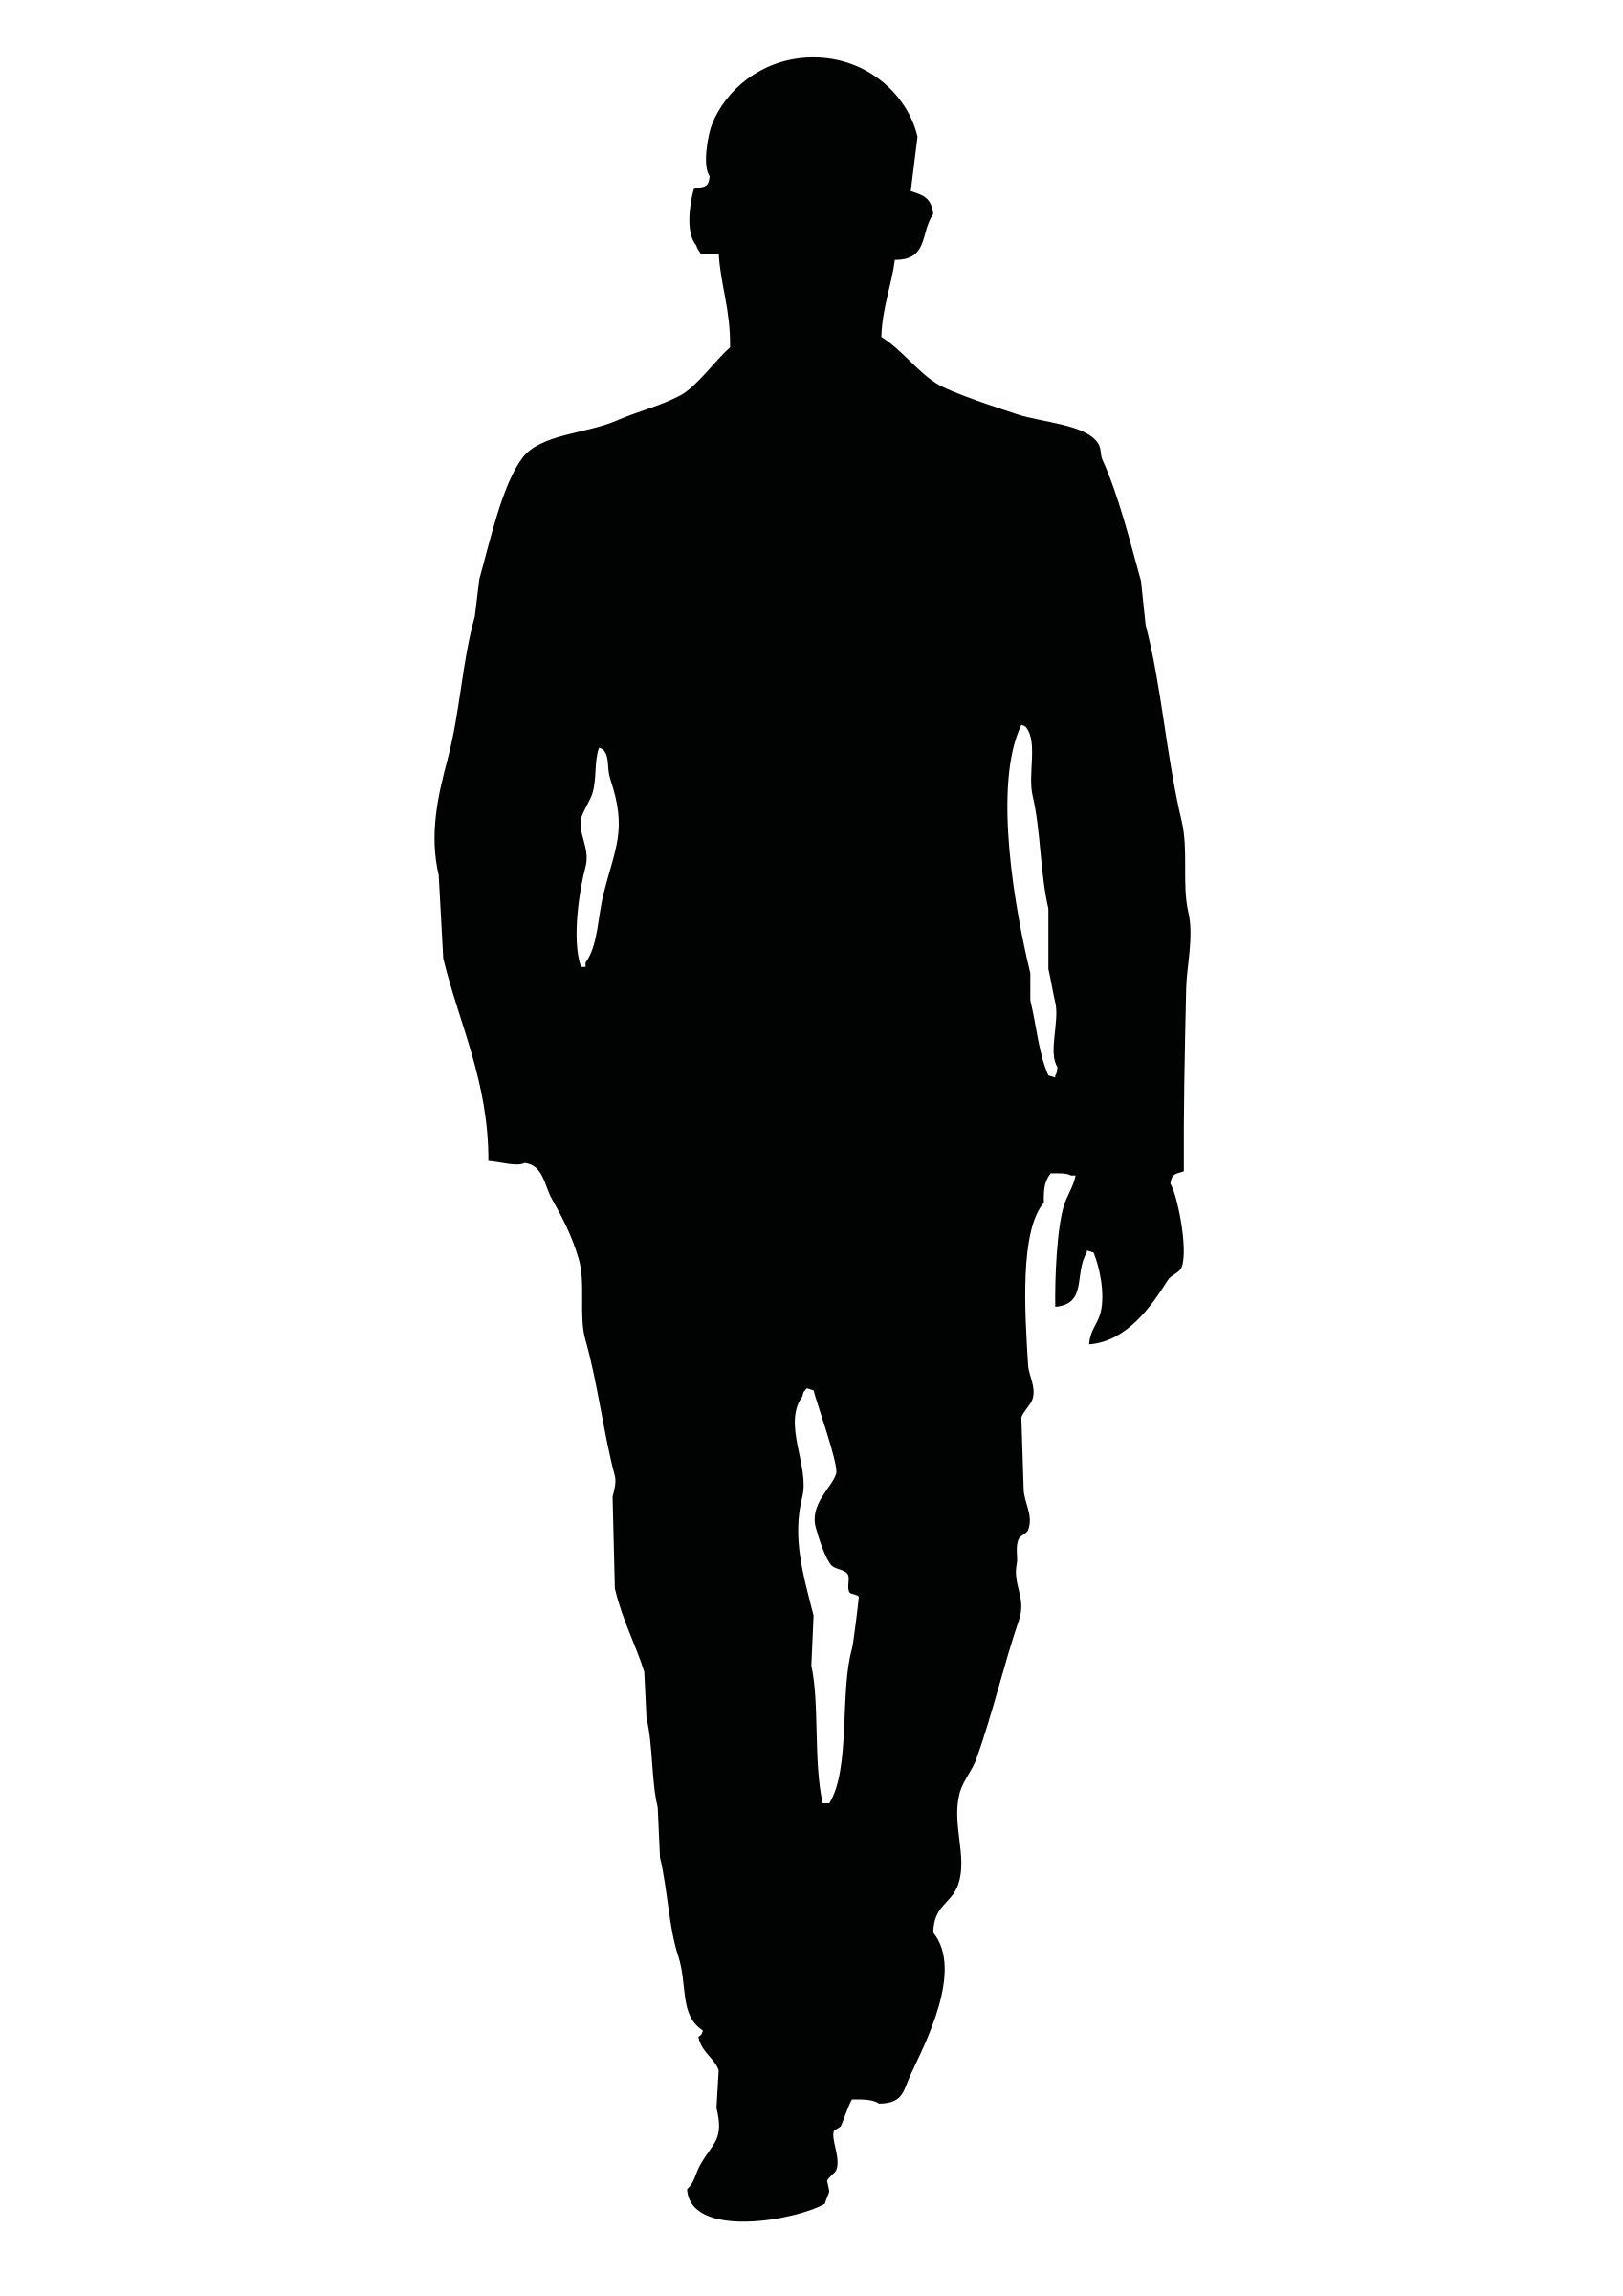 clipart walking male person